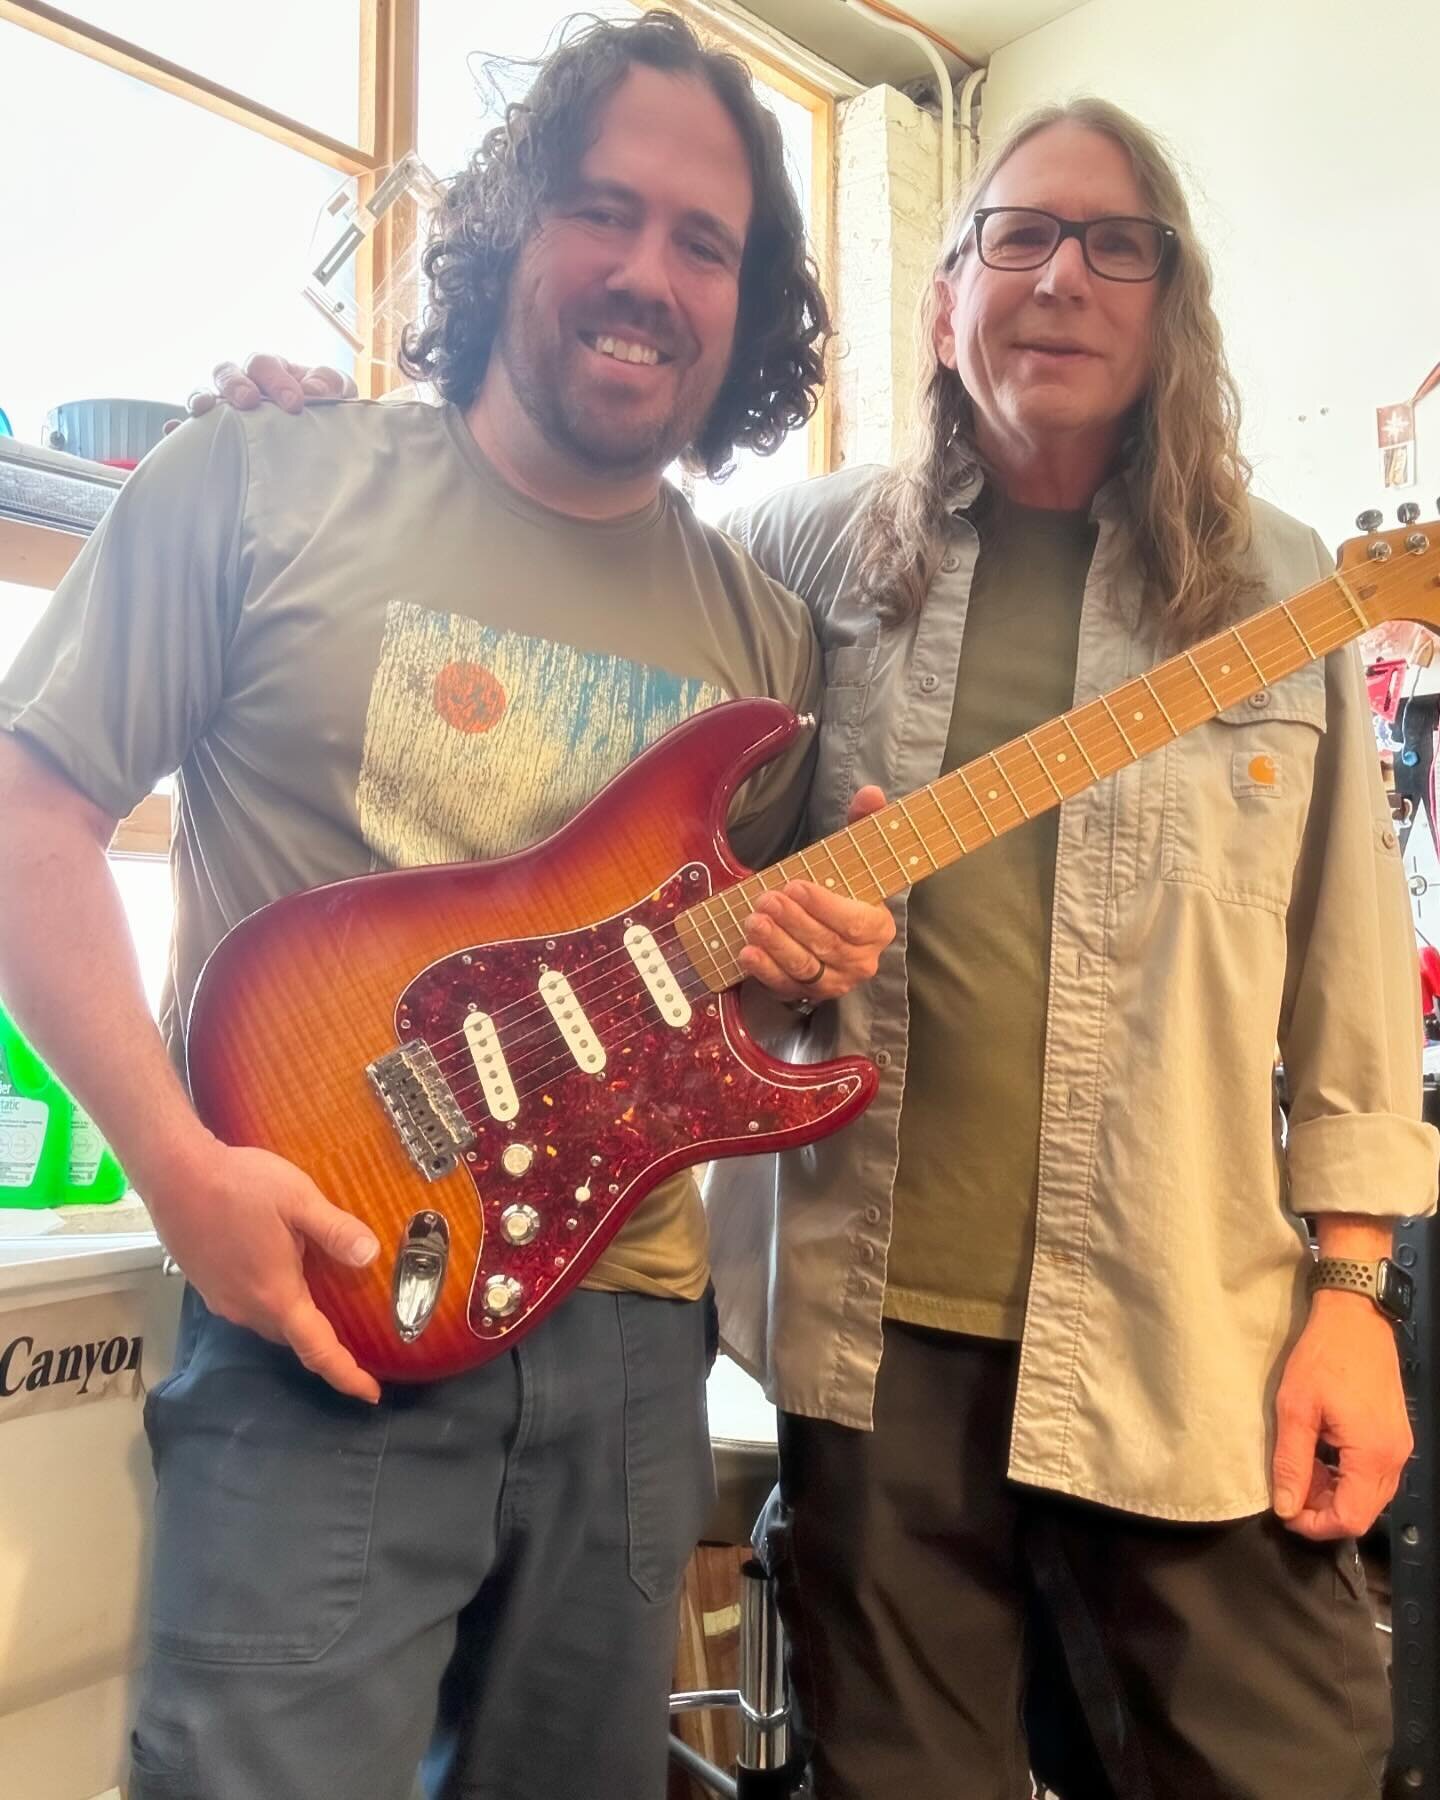 Always good to visit my buddy, @glennguitars at the @oldetownpickinparlor. Glenn helped me come up with the specs for a new neck from @musikraftusa. The build quality in the neck turned out great, and Glenn worked his magic on getting the neck instal